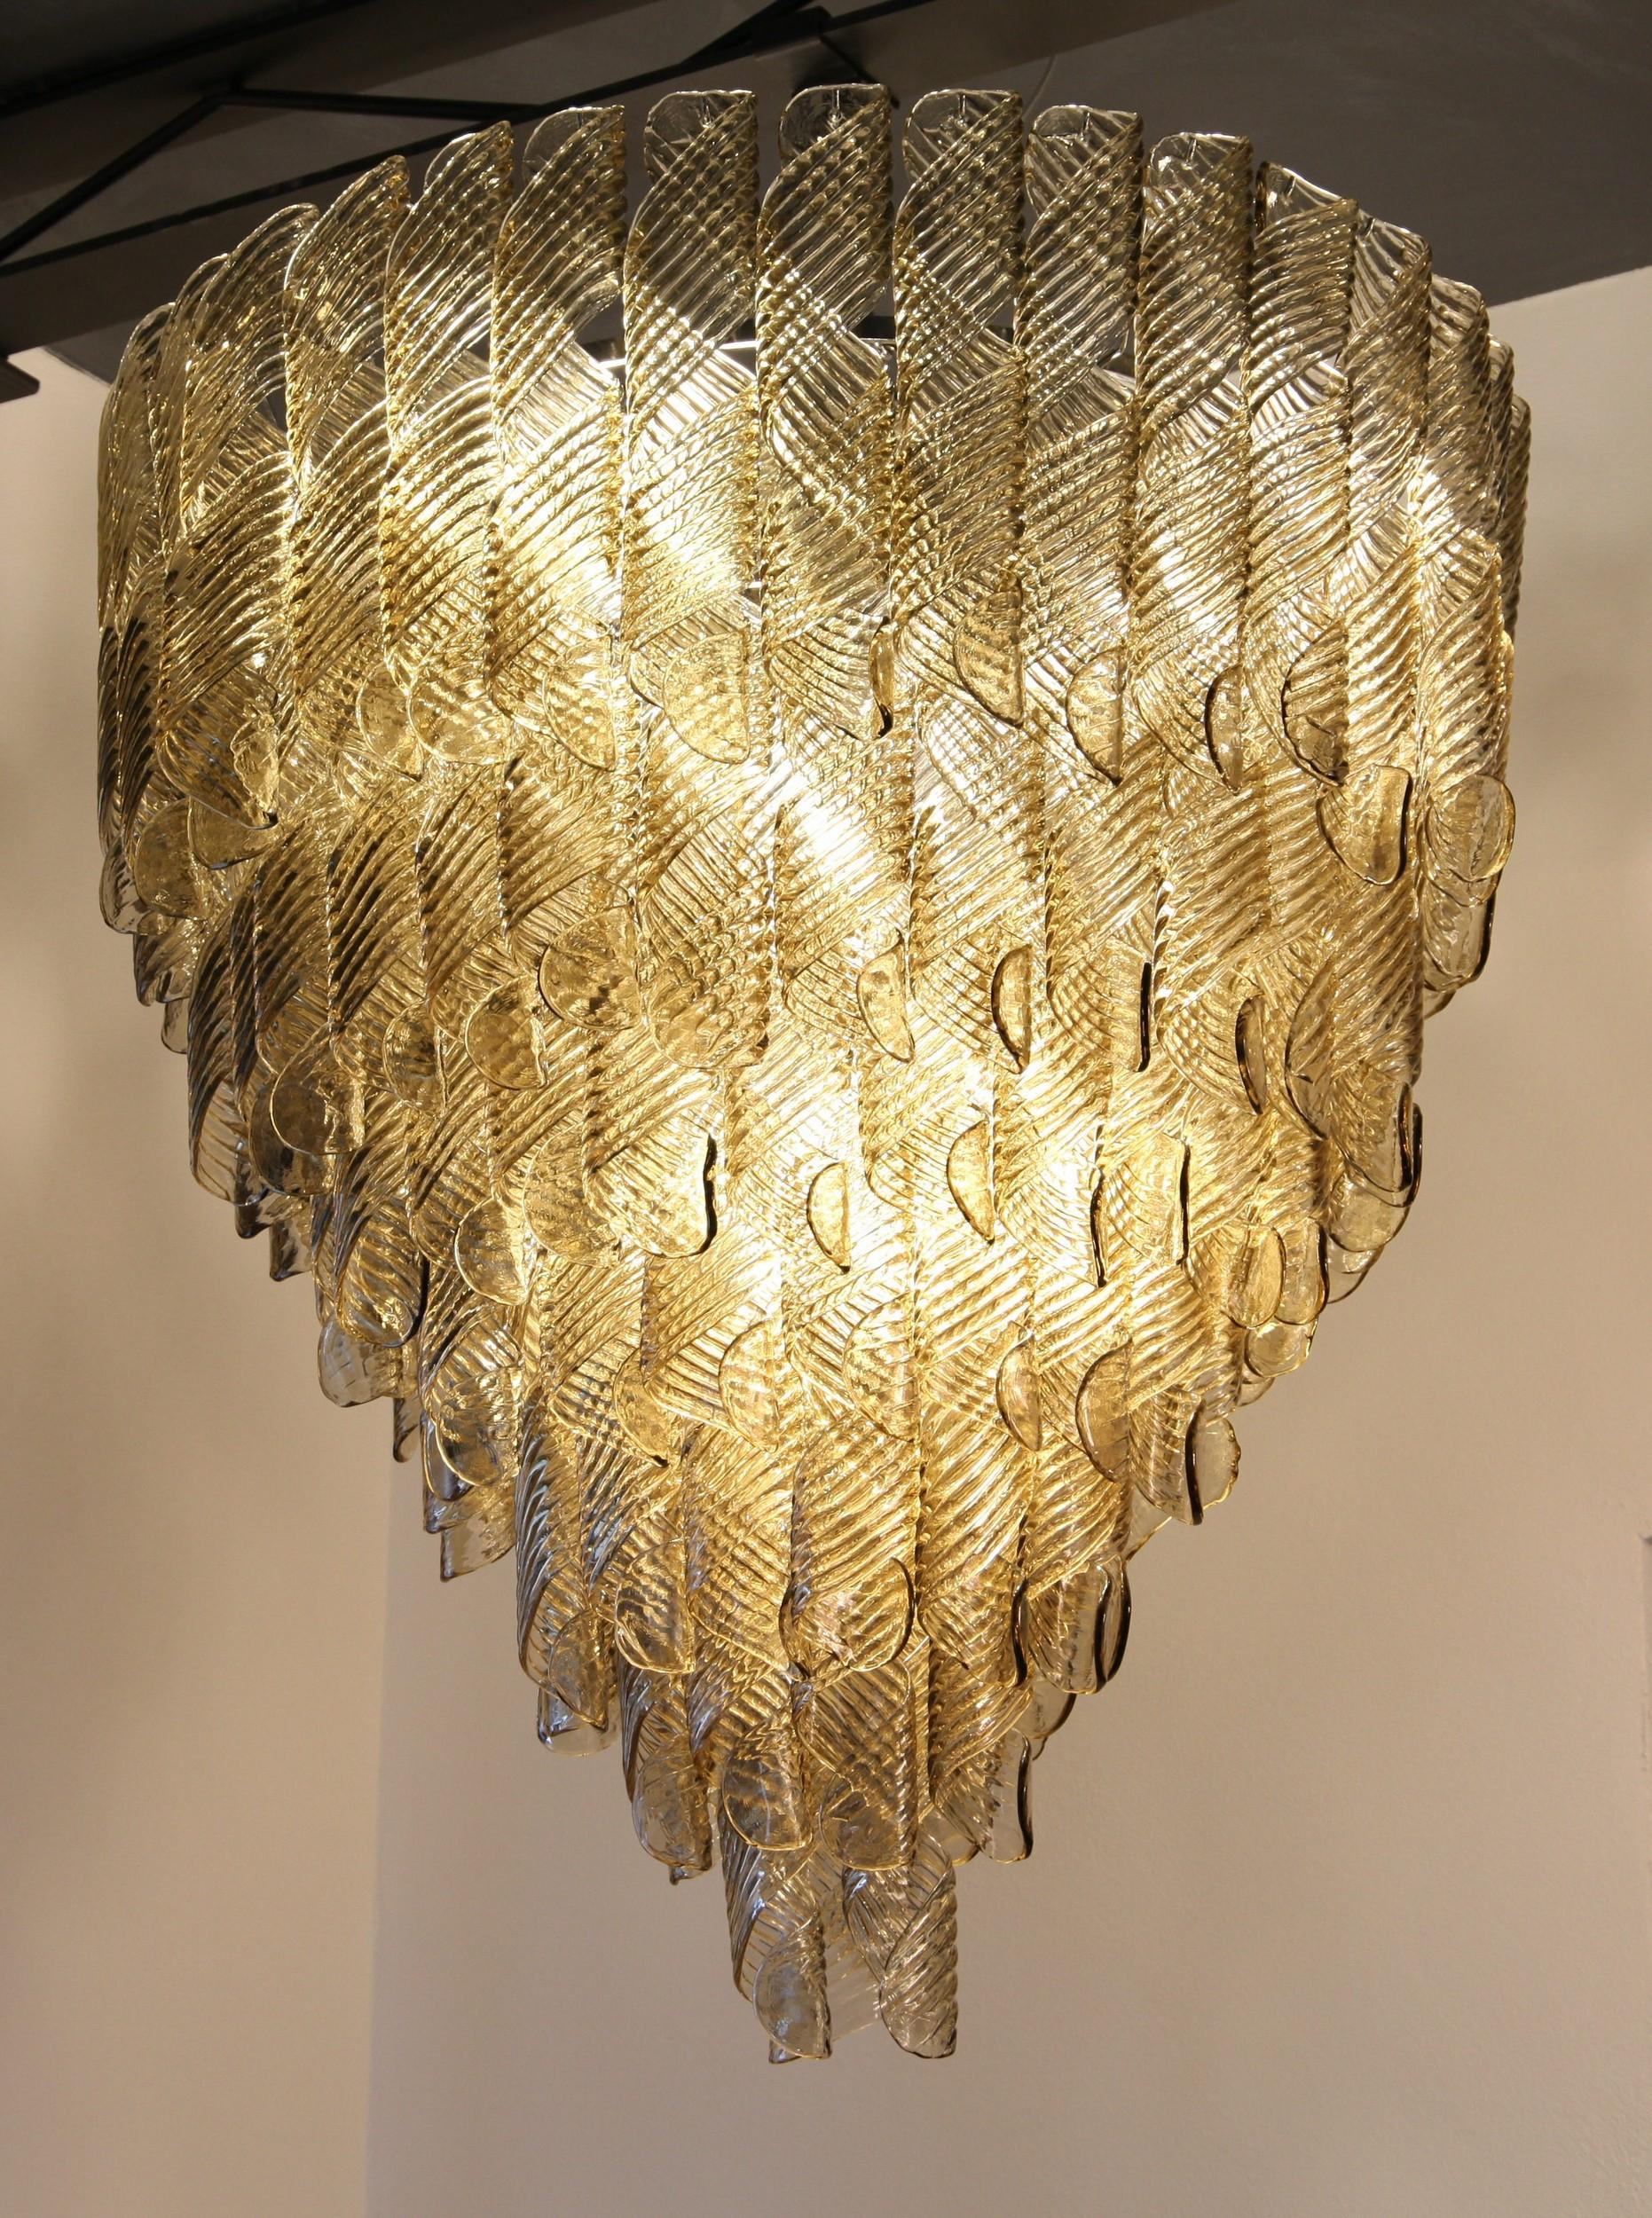 20th Century Monumental Chandelier, Murano Fume Glass in Spiral Ribbed Elements, 7 Tiers